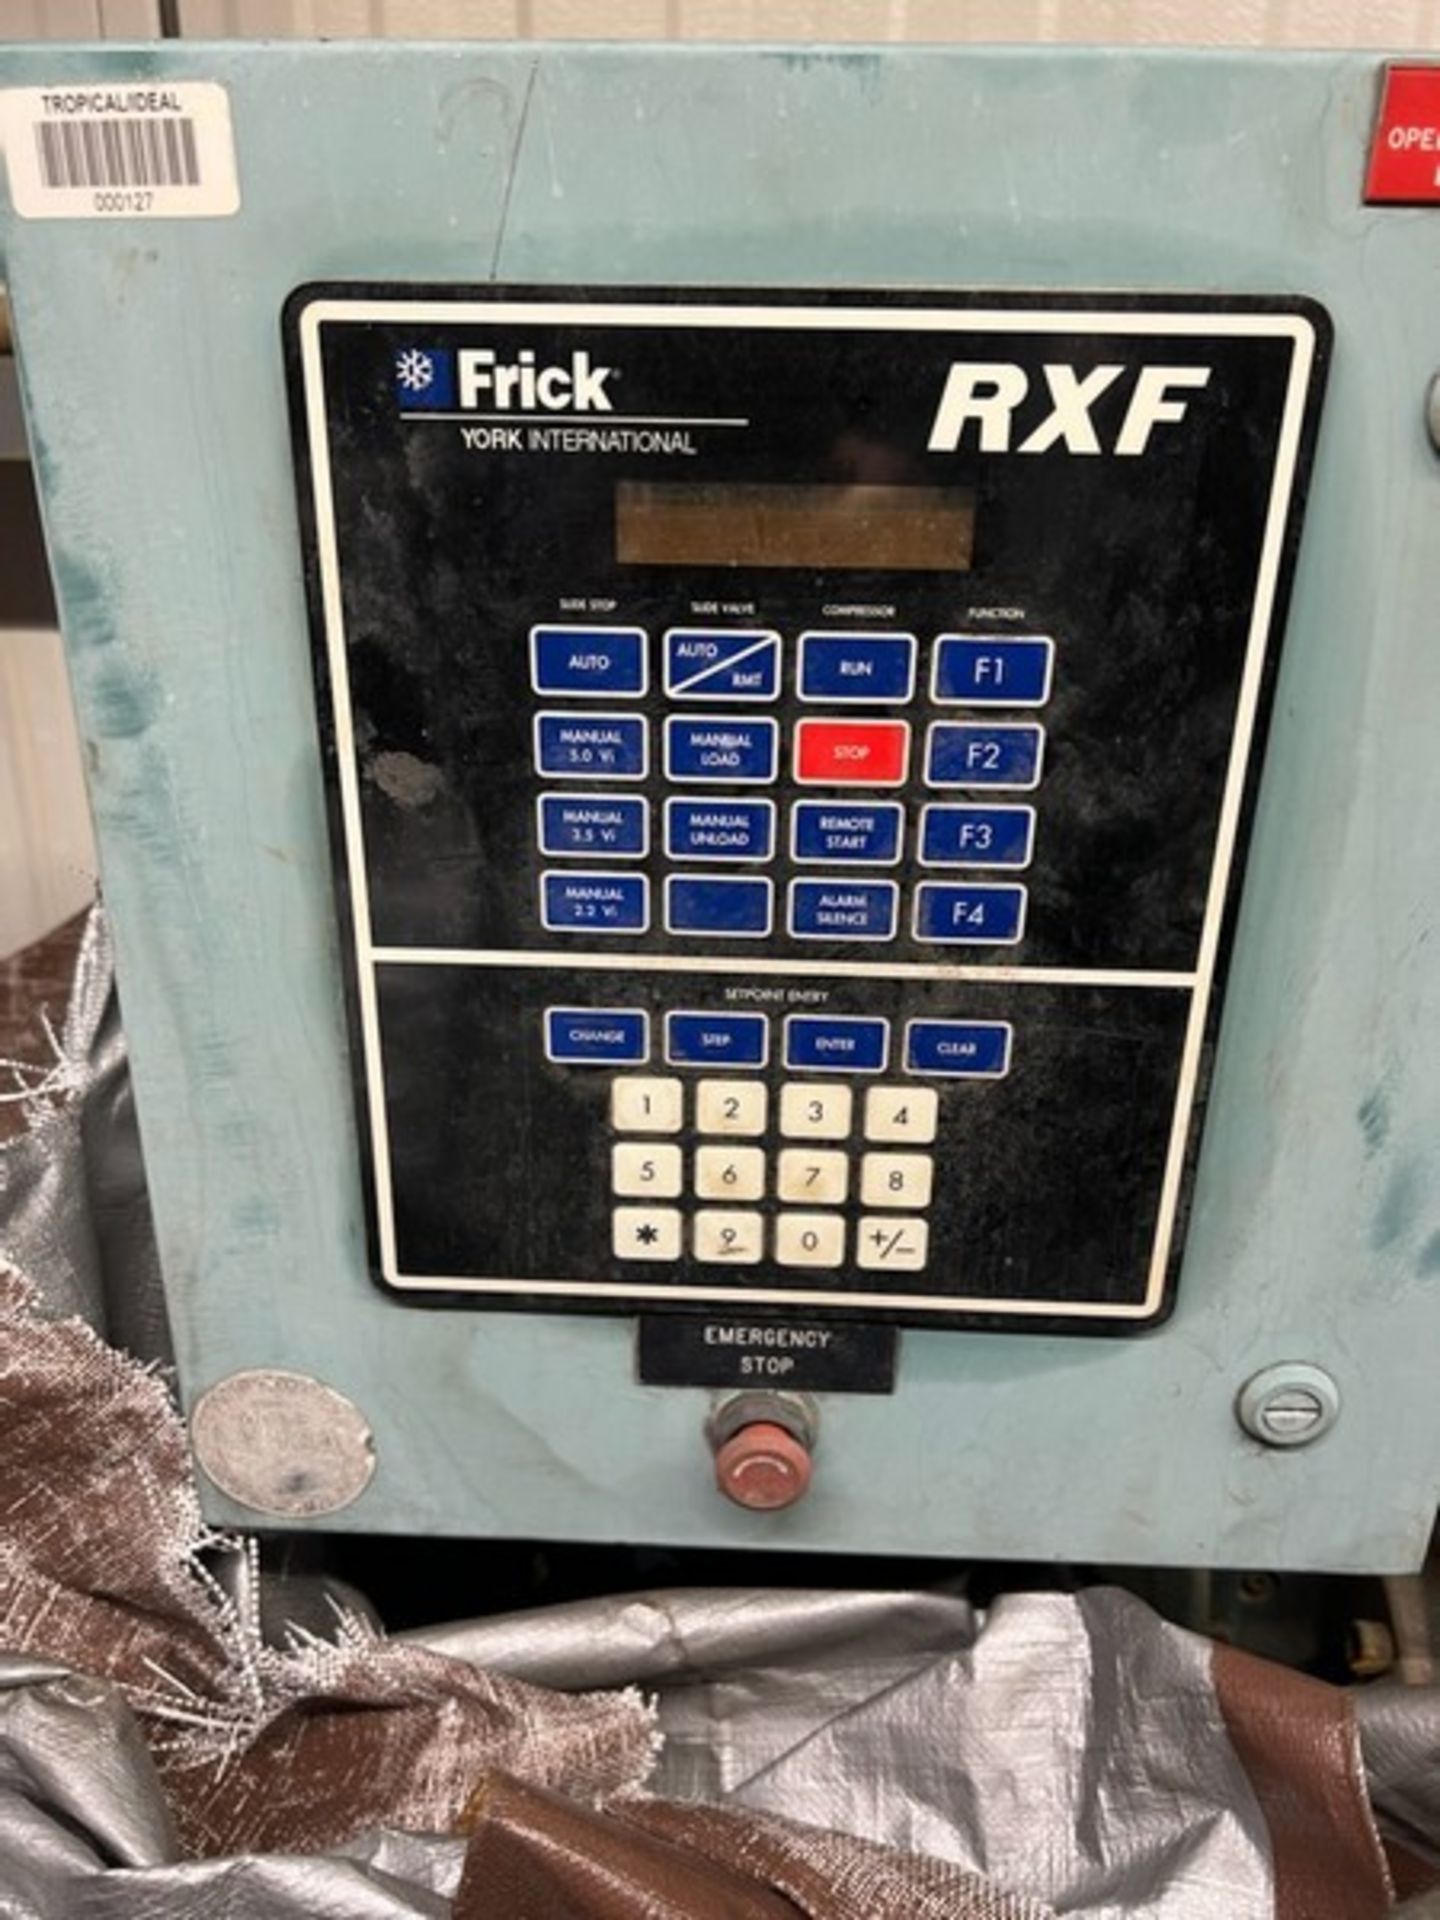 Frick 100 hp Rotary Screw Compressor, Model RXF30, S/N XJF120M0067EE WITH NH3/R22 Refrigerant, - Image 2 of 3